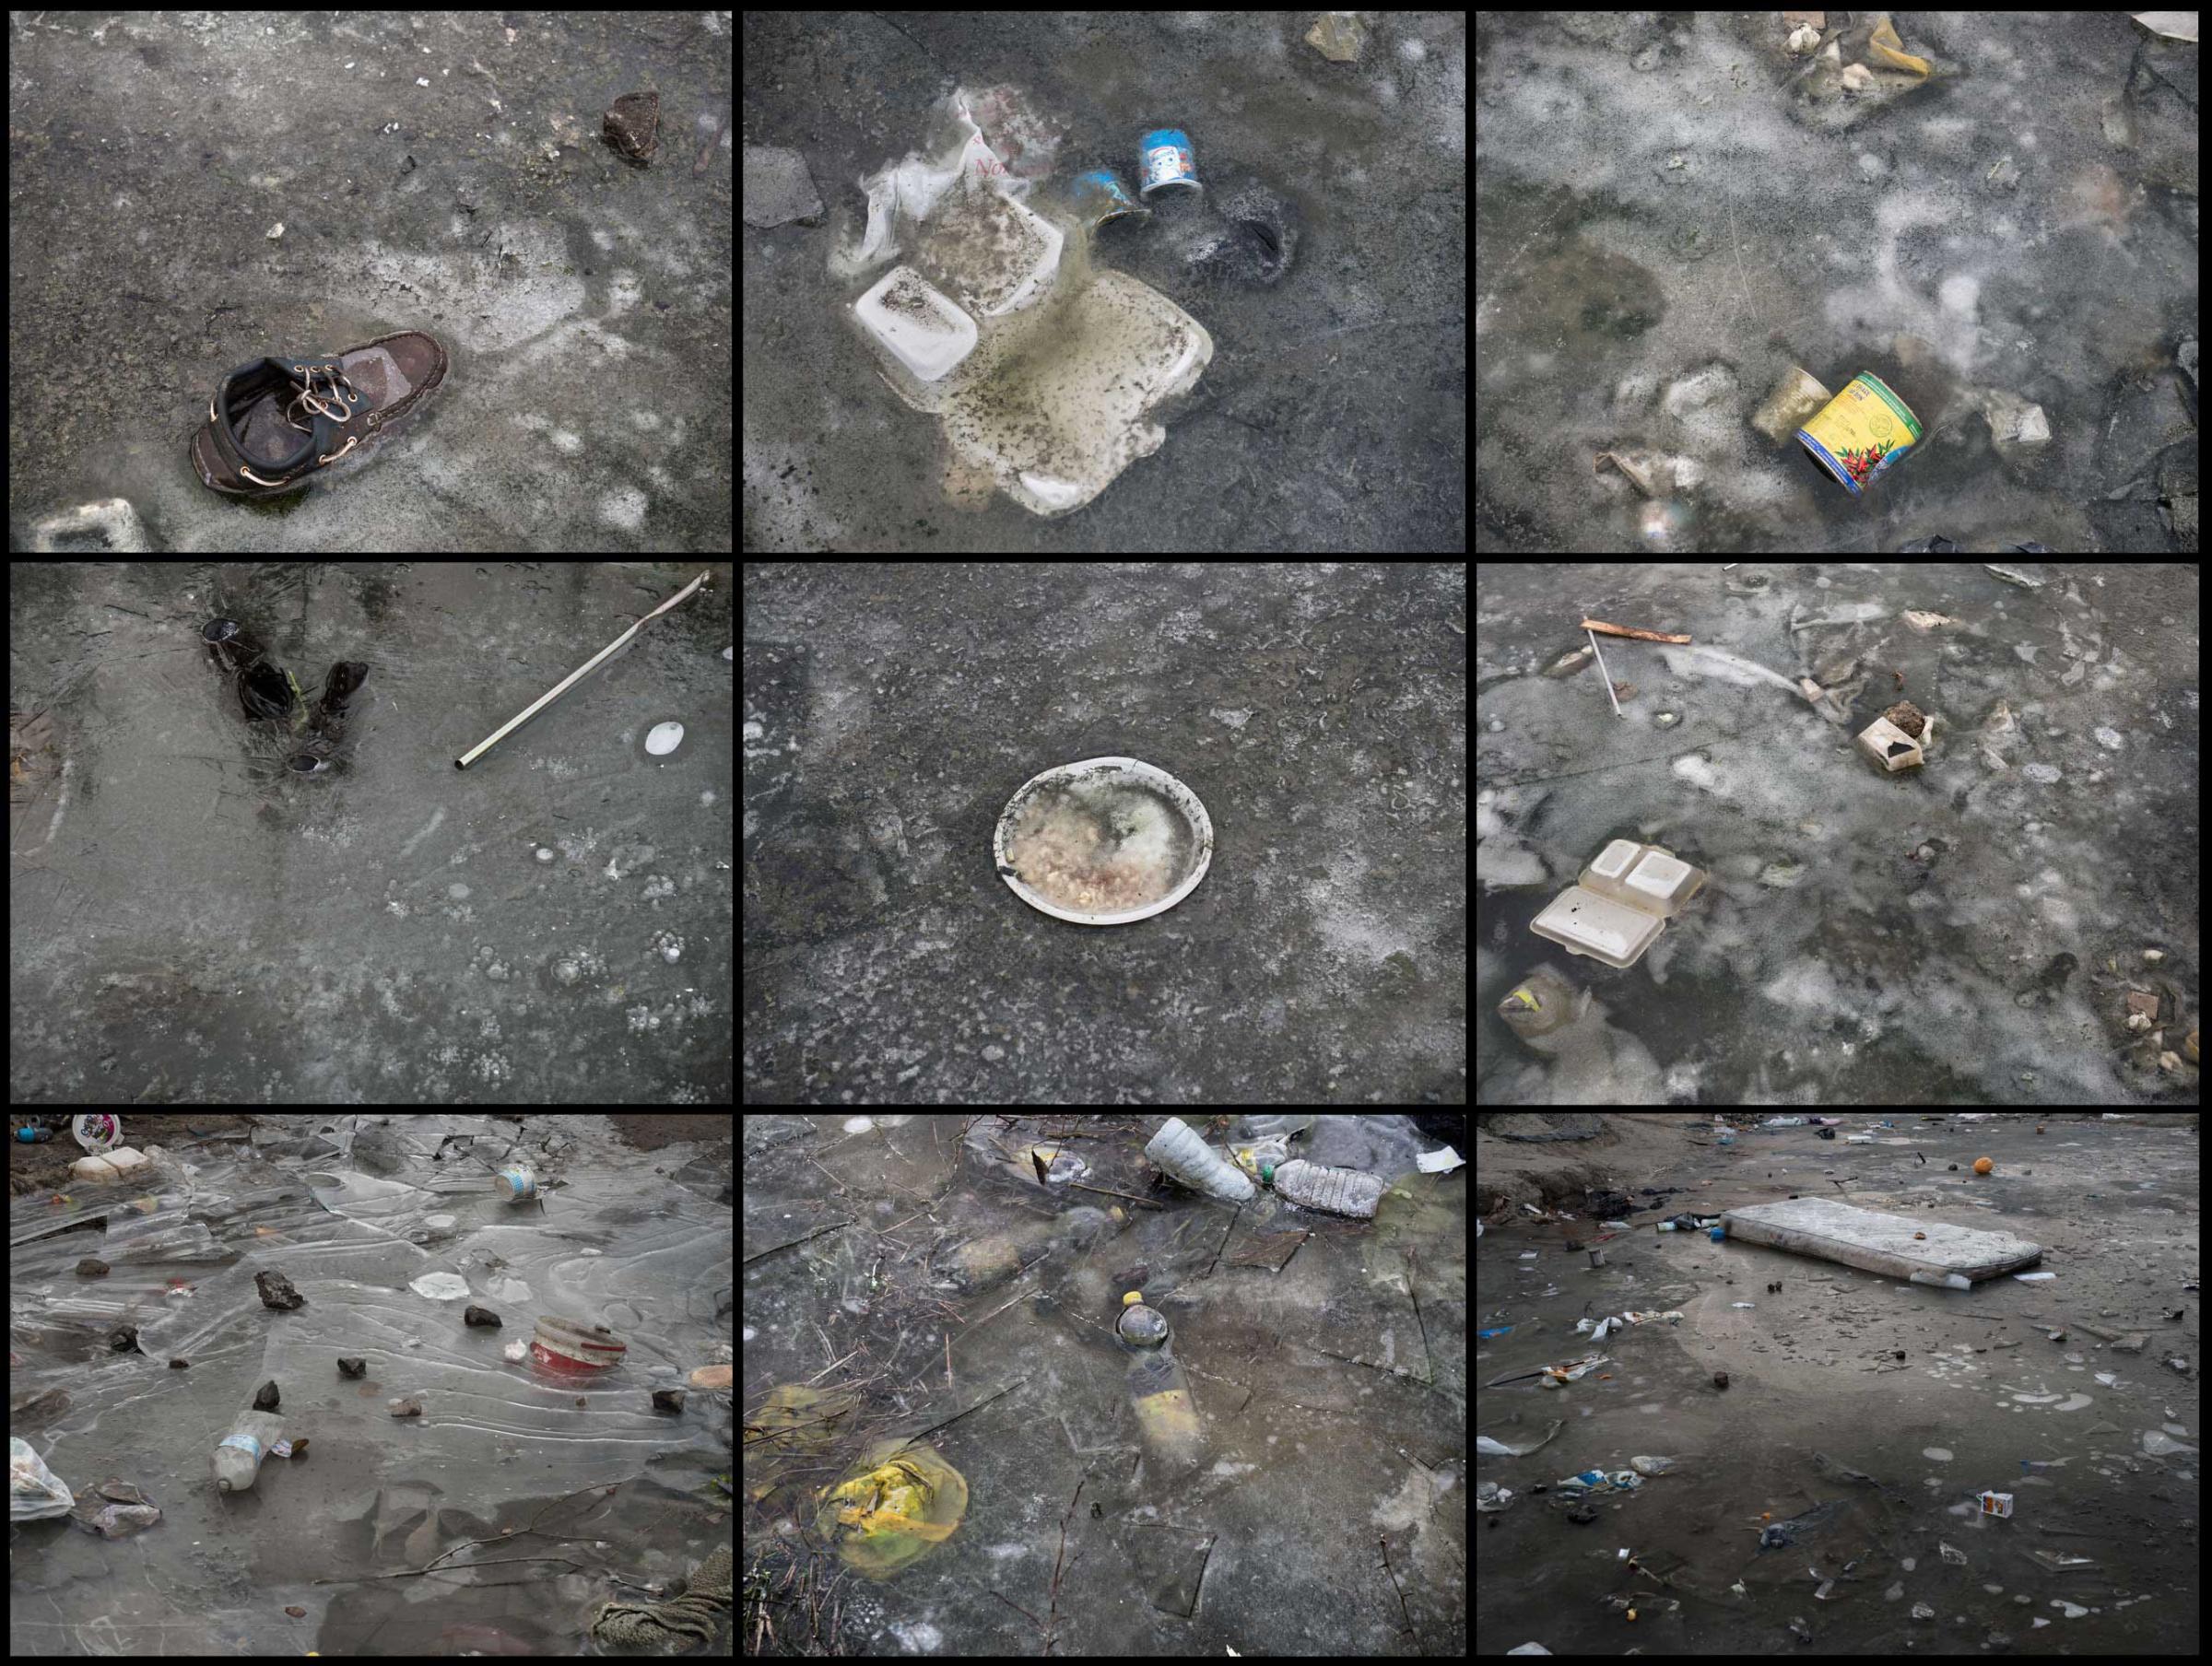 Details of personal belongings and trash frozen in the ice in the "jungle" in Calais, France, where a  mix of refugees, asylum seekers and economic migrants from Darfur, Afghanistan, Syria, Iraq, Eritrea have come to live in the hopes of eventually making their way to the United Kingdom, Jan. 2015.